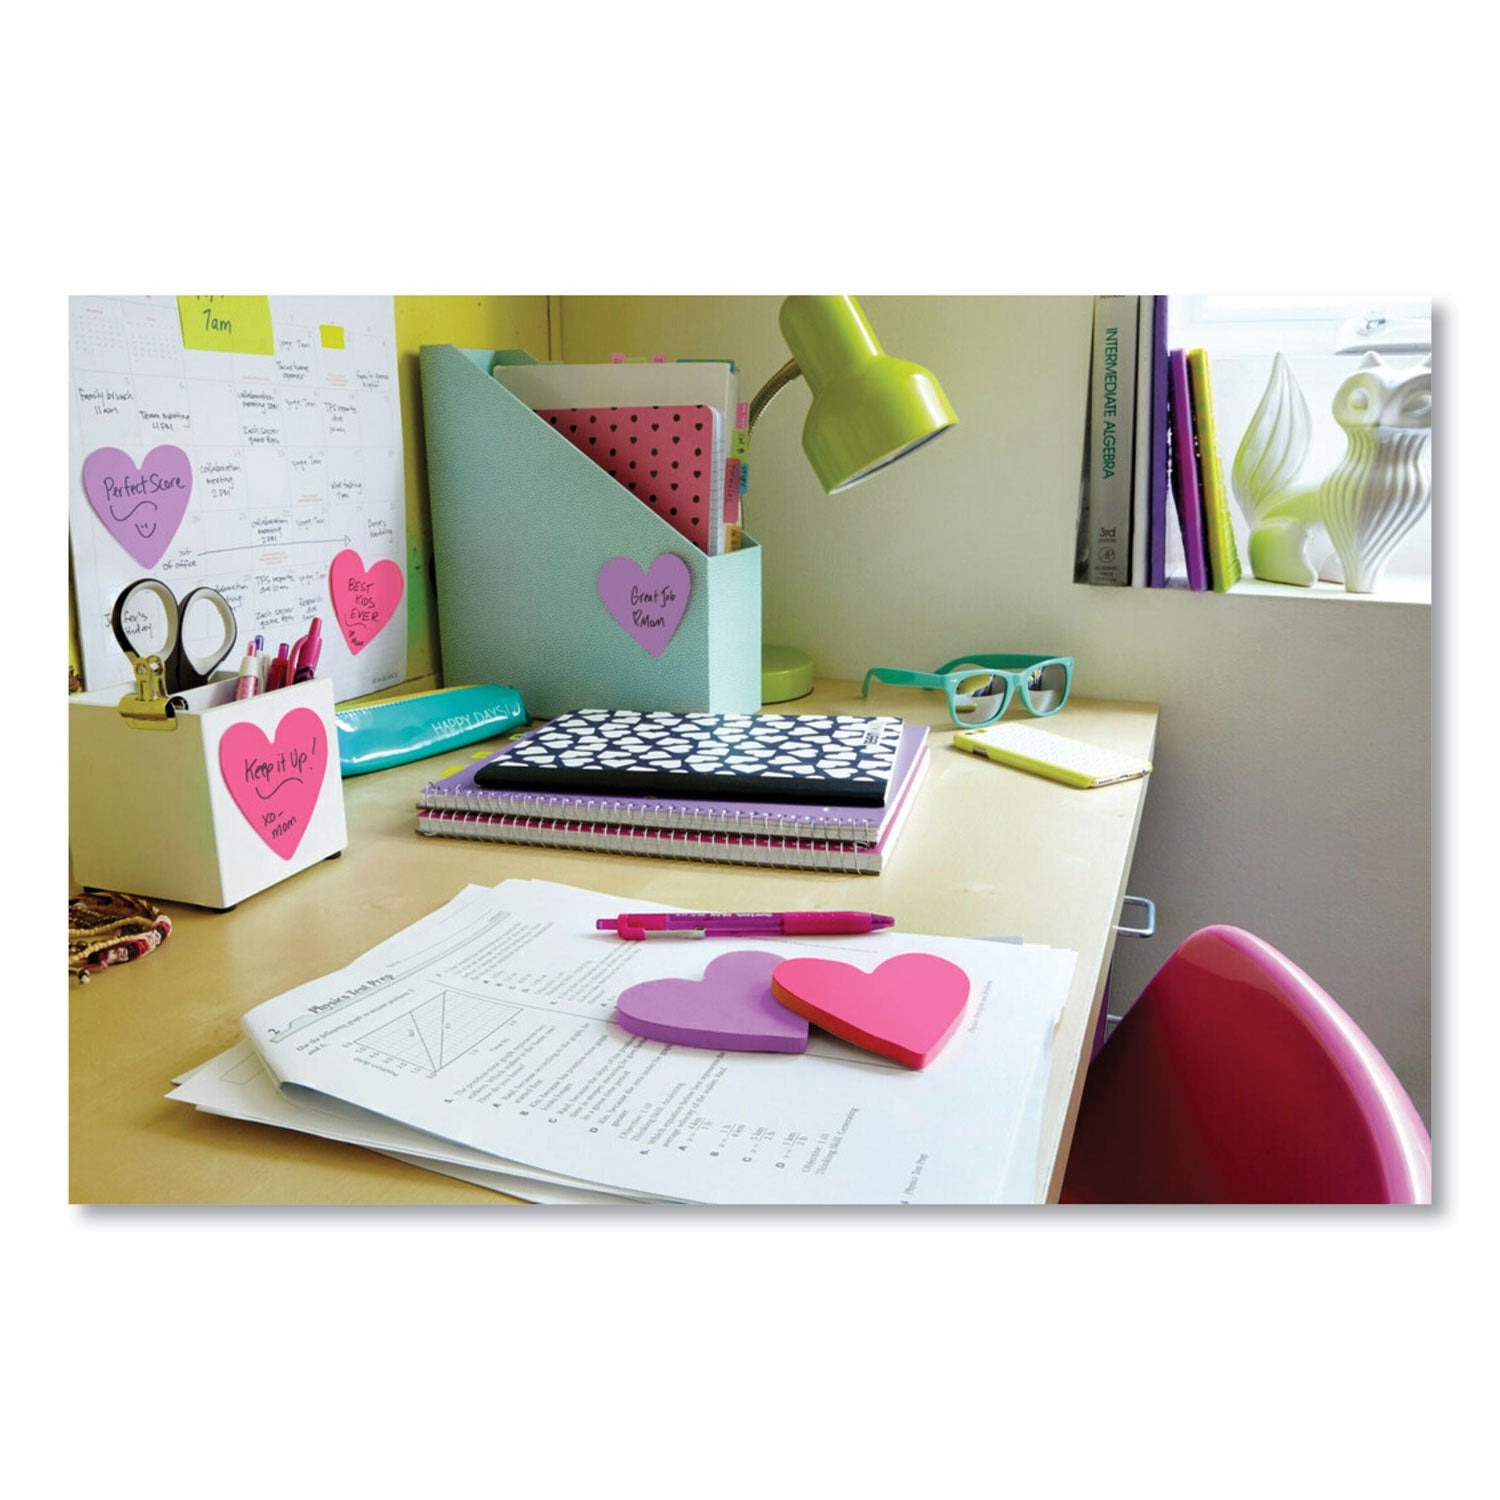 die-cut-heart-shaped-notepads-3-x-3-pink-purple-75-sheets-pad-2-pads-pack_mmm7350hrt - 4